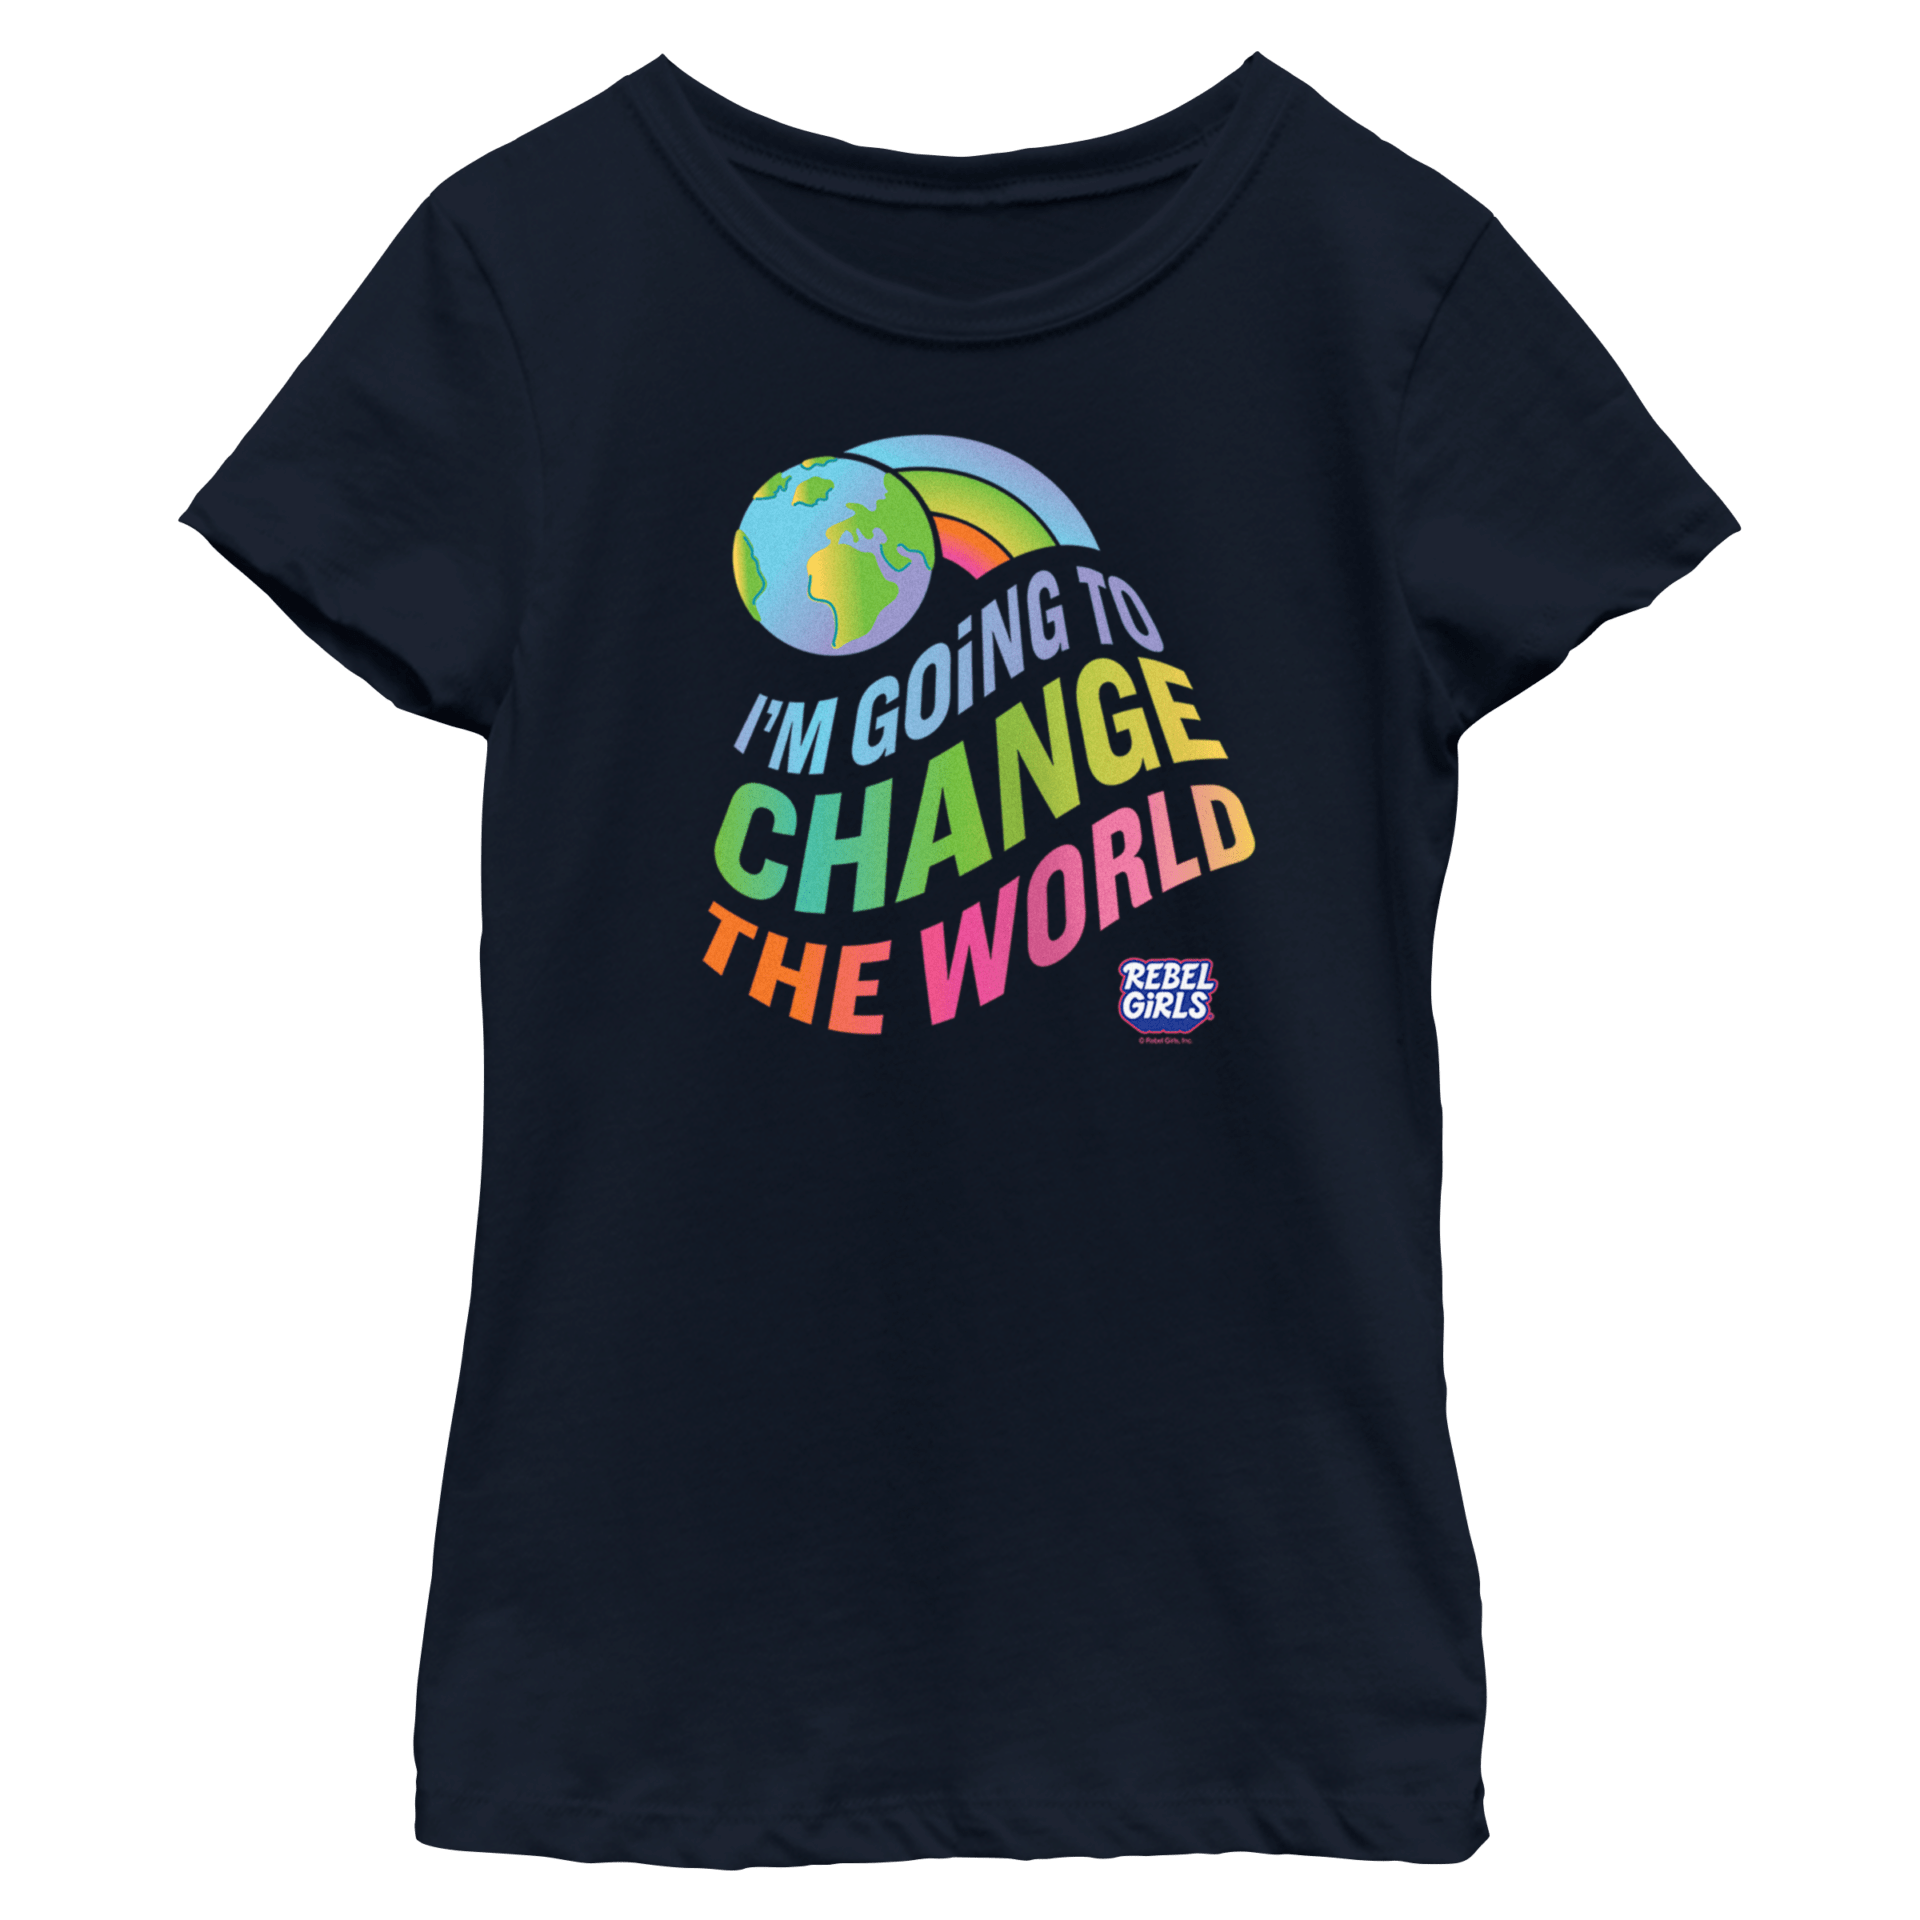 “I’m Going To Change The World” Tees and Tops - thumbnail no 1